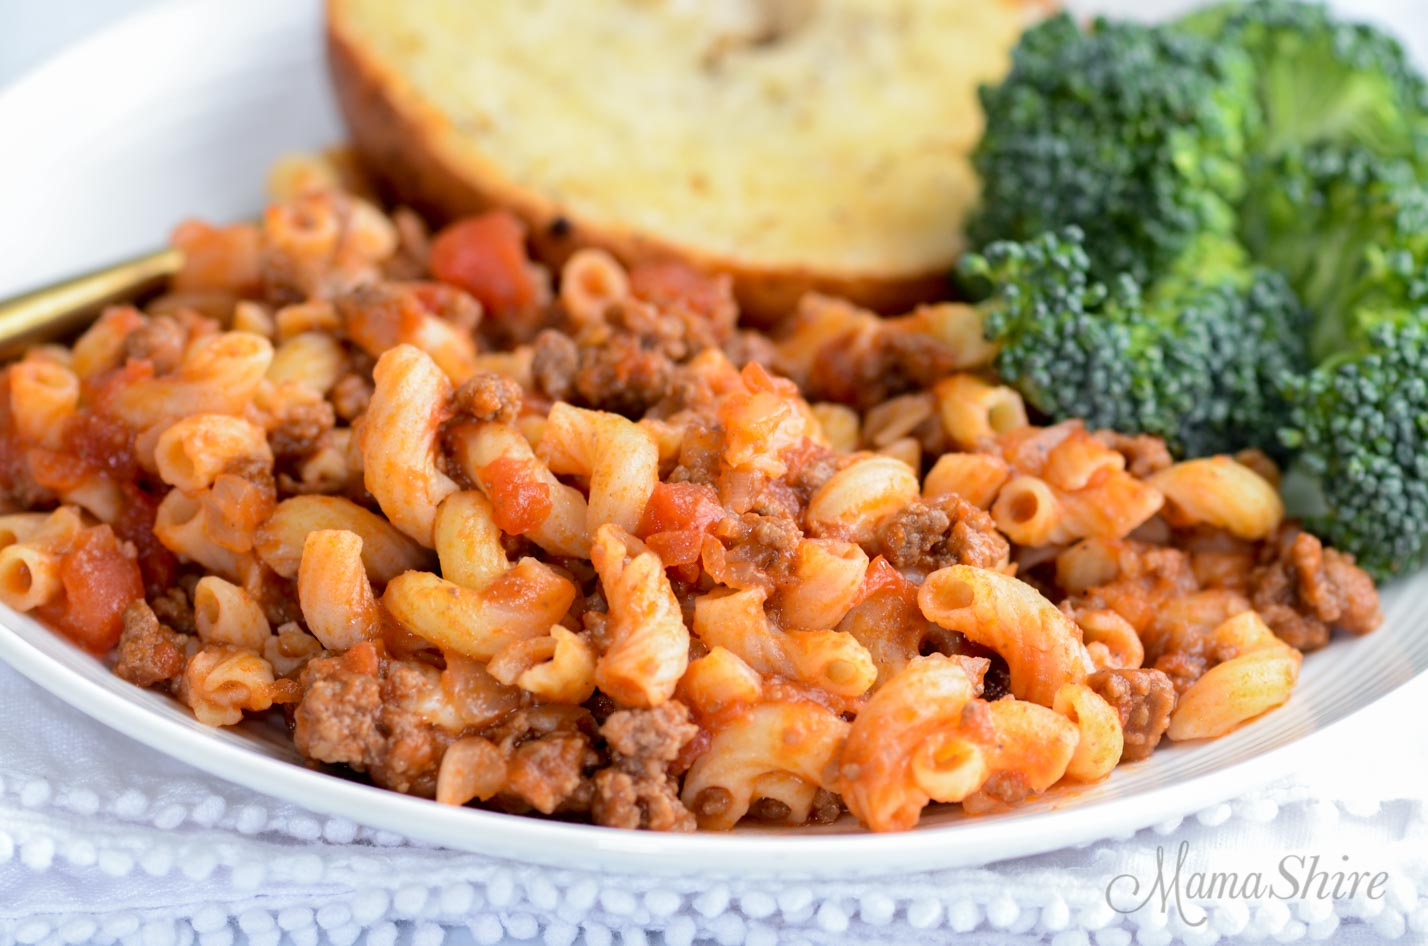 A serving of American goulash made gluten-free.